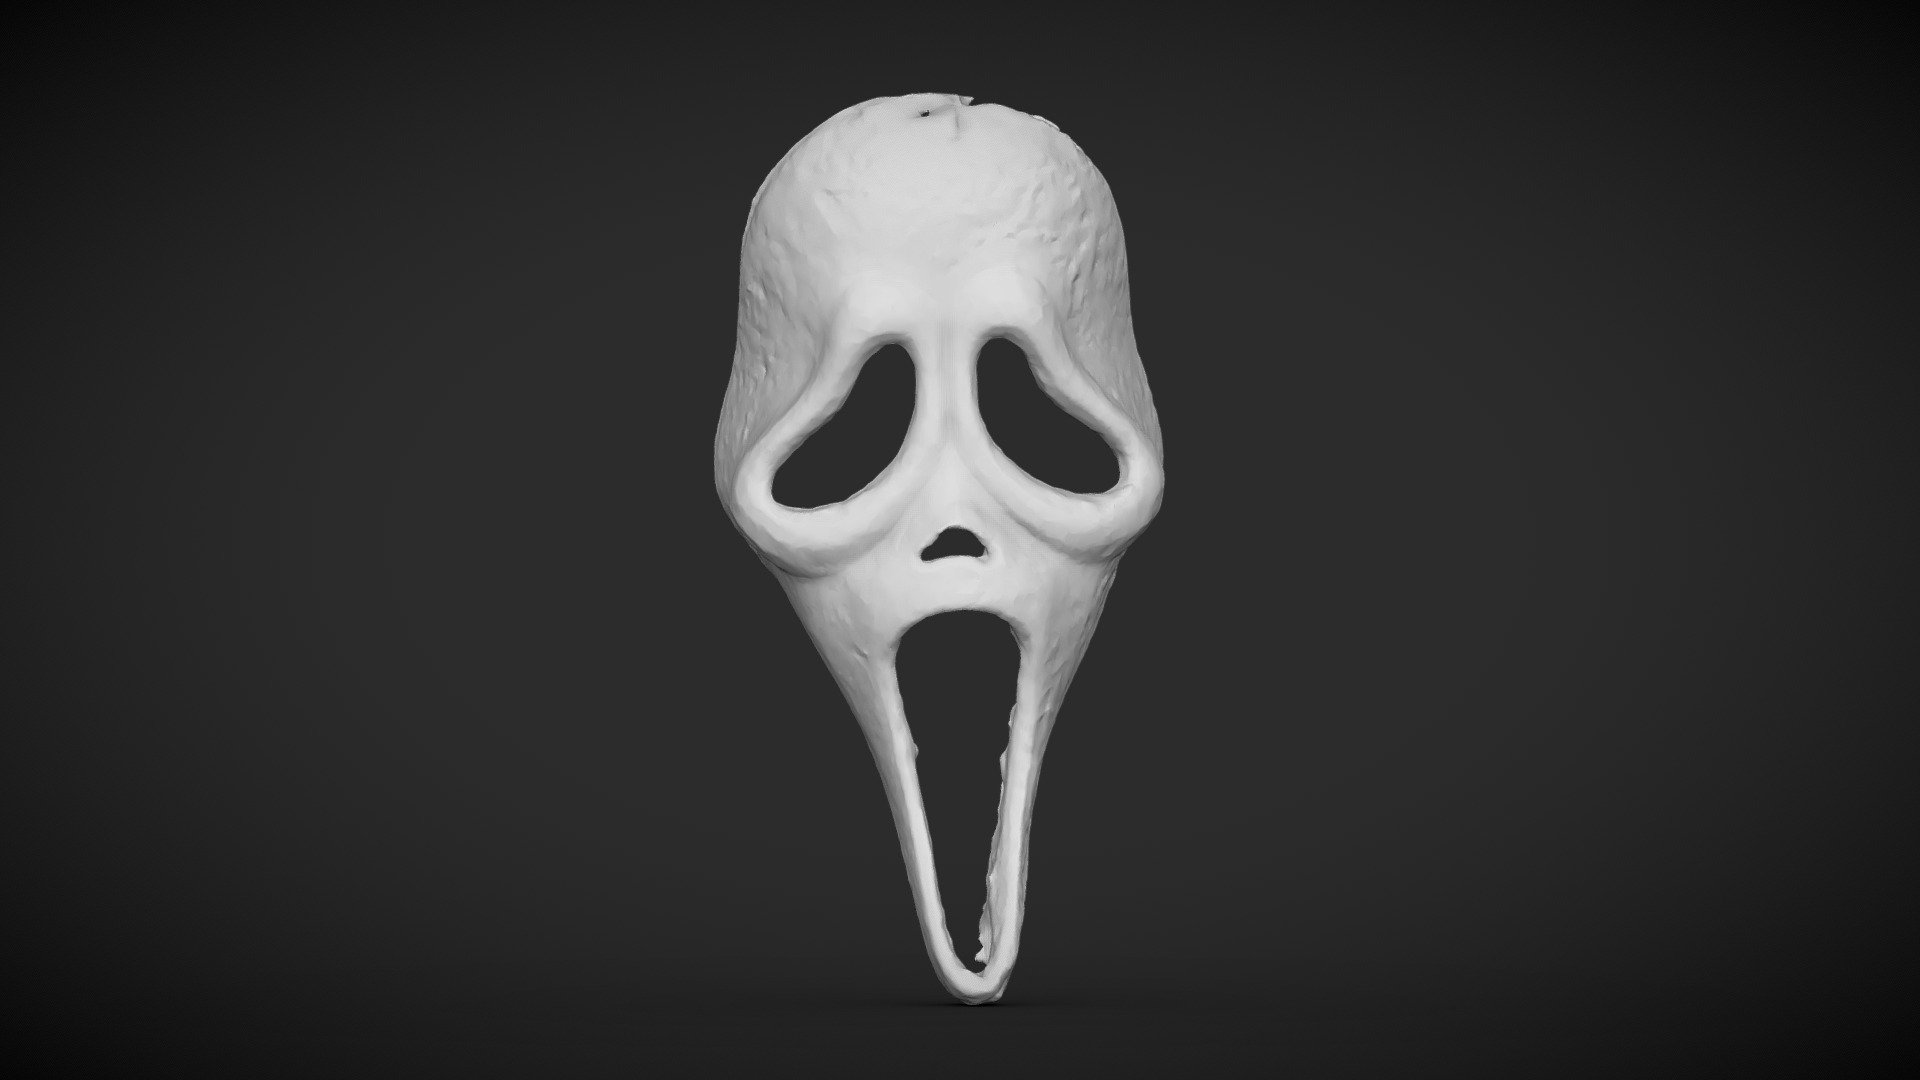 Scream Mask: Over 3,204 Royalty-Free Licensable Stock Vectors & Vector Art